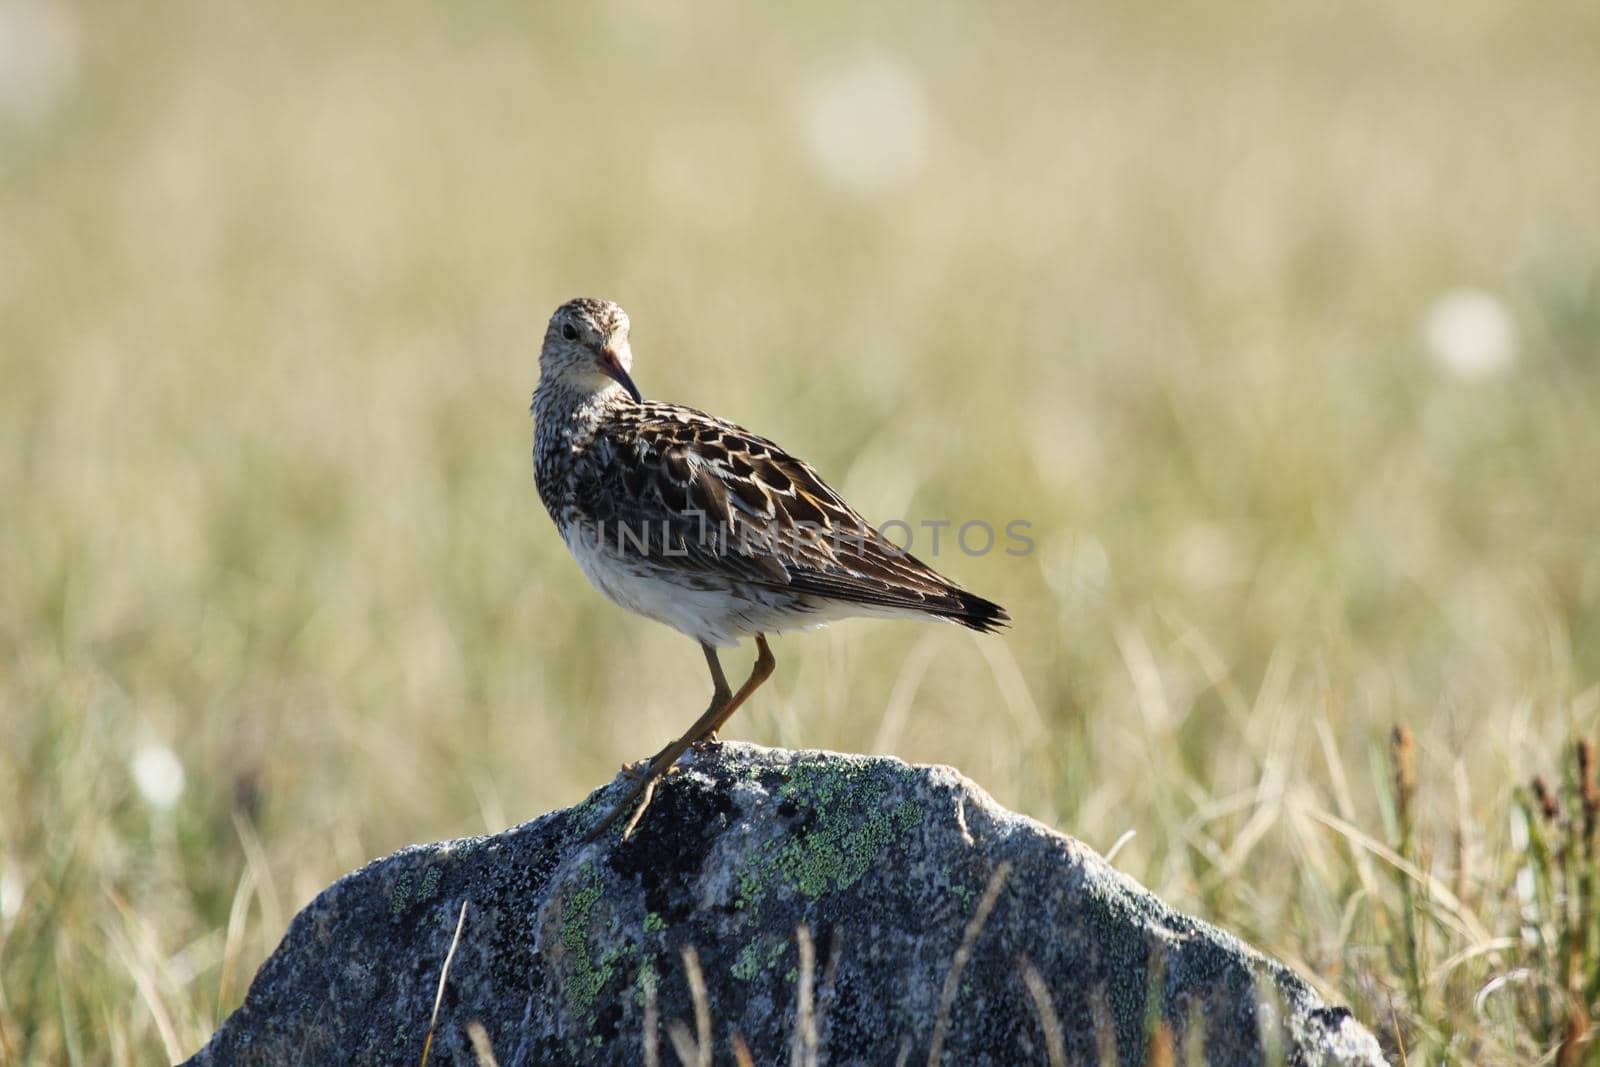 Pectoral sandpiper, Calidris melanotos, standing on a rock with tundra grass in the background, near Pond Inlet Nunavut